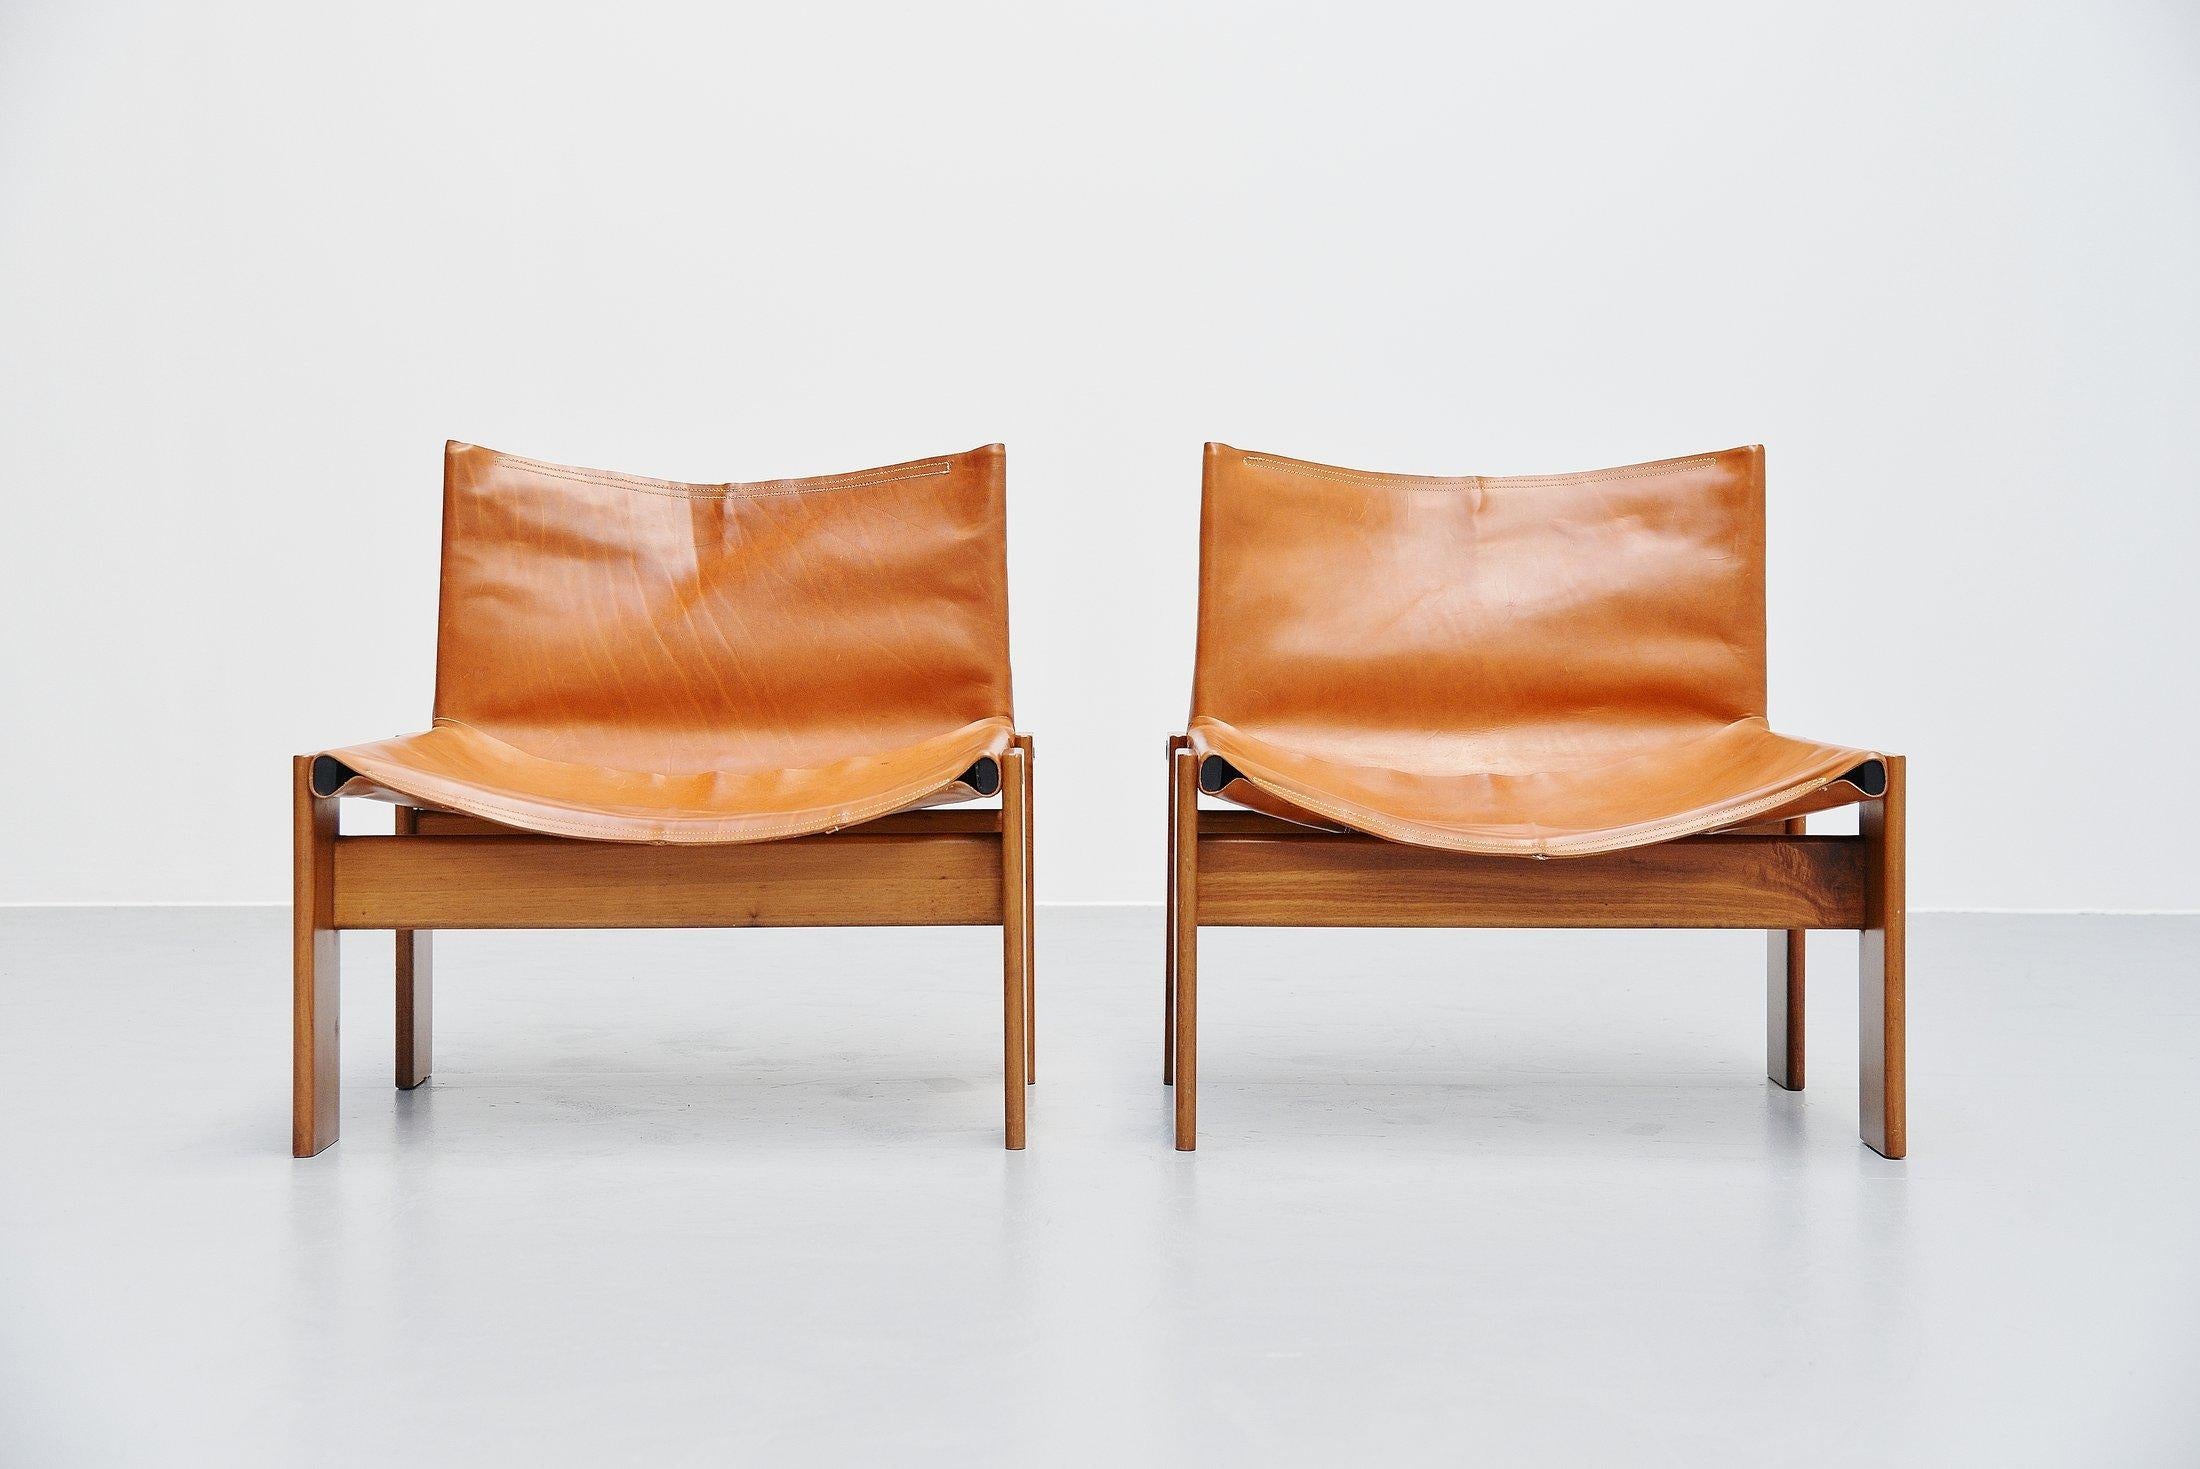 Super rare low 'Monk' lounge chairs designed by Afra e Tobia Scarpa and manufactured by Molteni, Italy 1974. These chairs have solid walnut legs and natural leather seats. I have never seen these low lounge chairs and also cannot find them on the